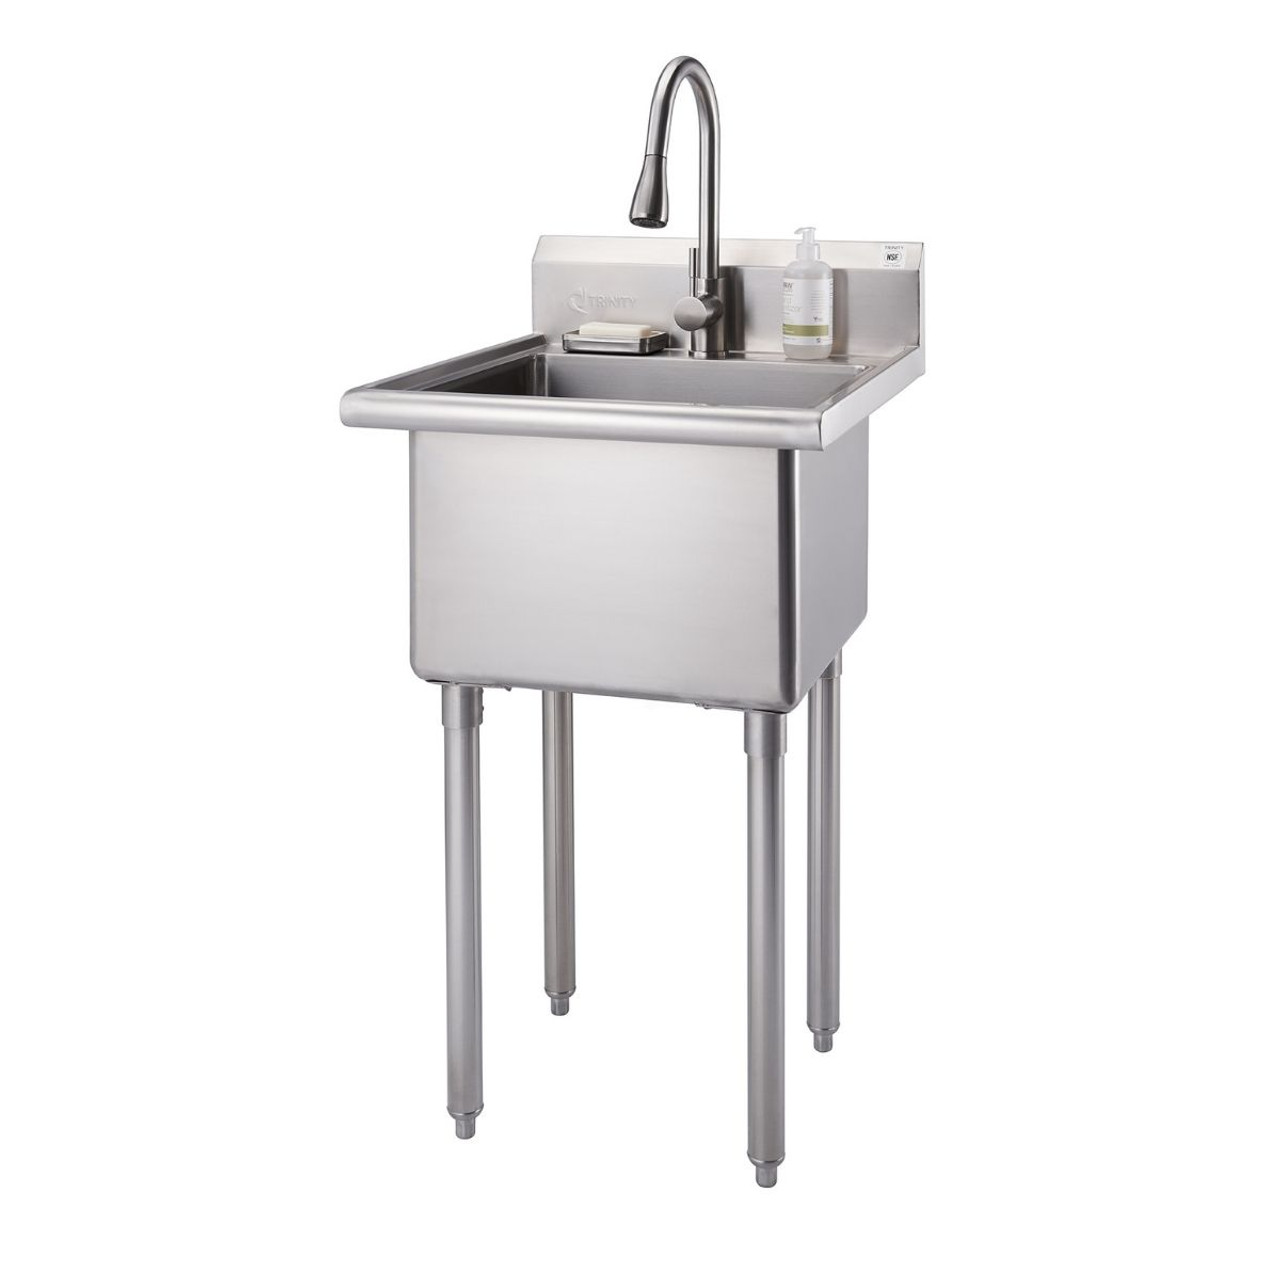 multifunctional disassembly combination kitchen sink surface